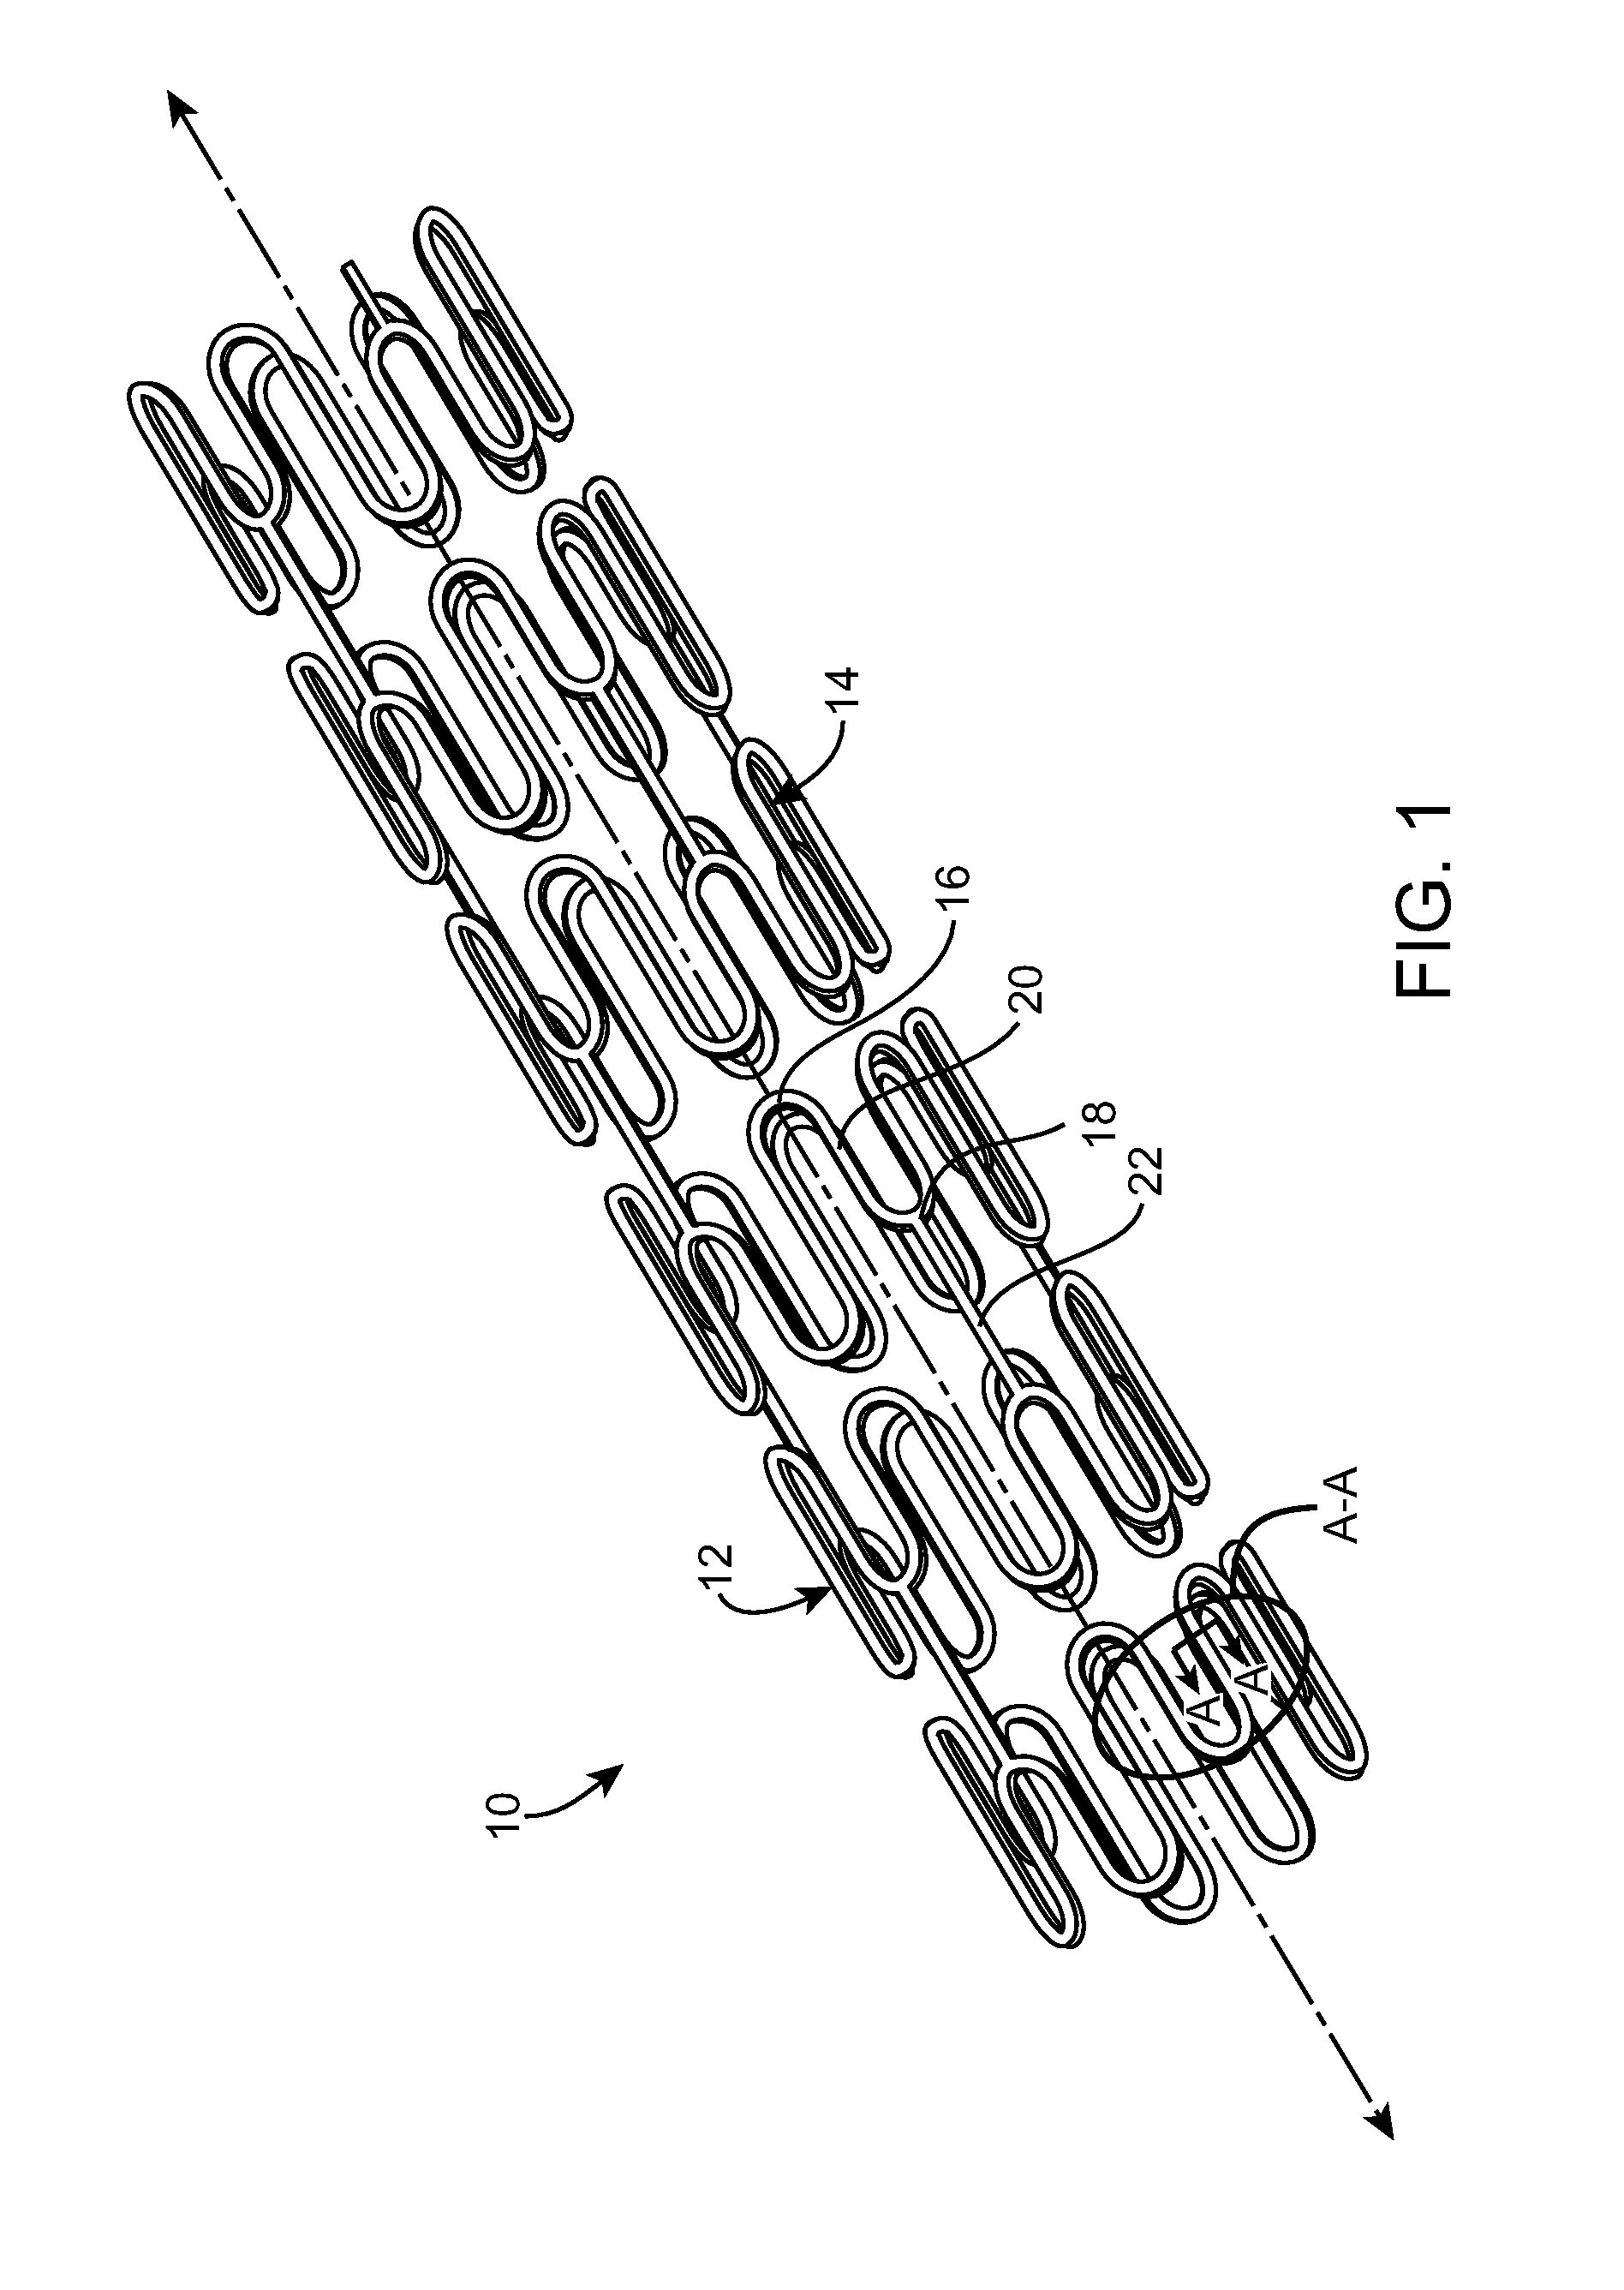 Stent Coating Including Therapeutic Biodegradable Glass, and Method of Making